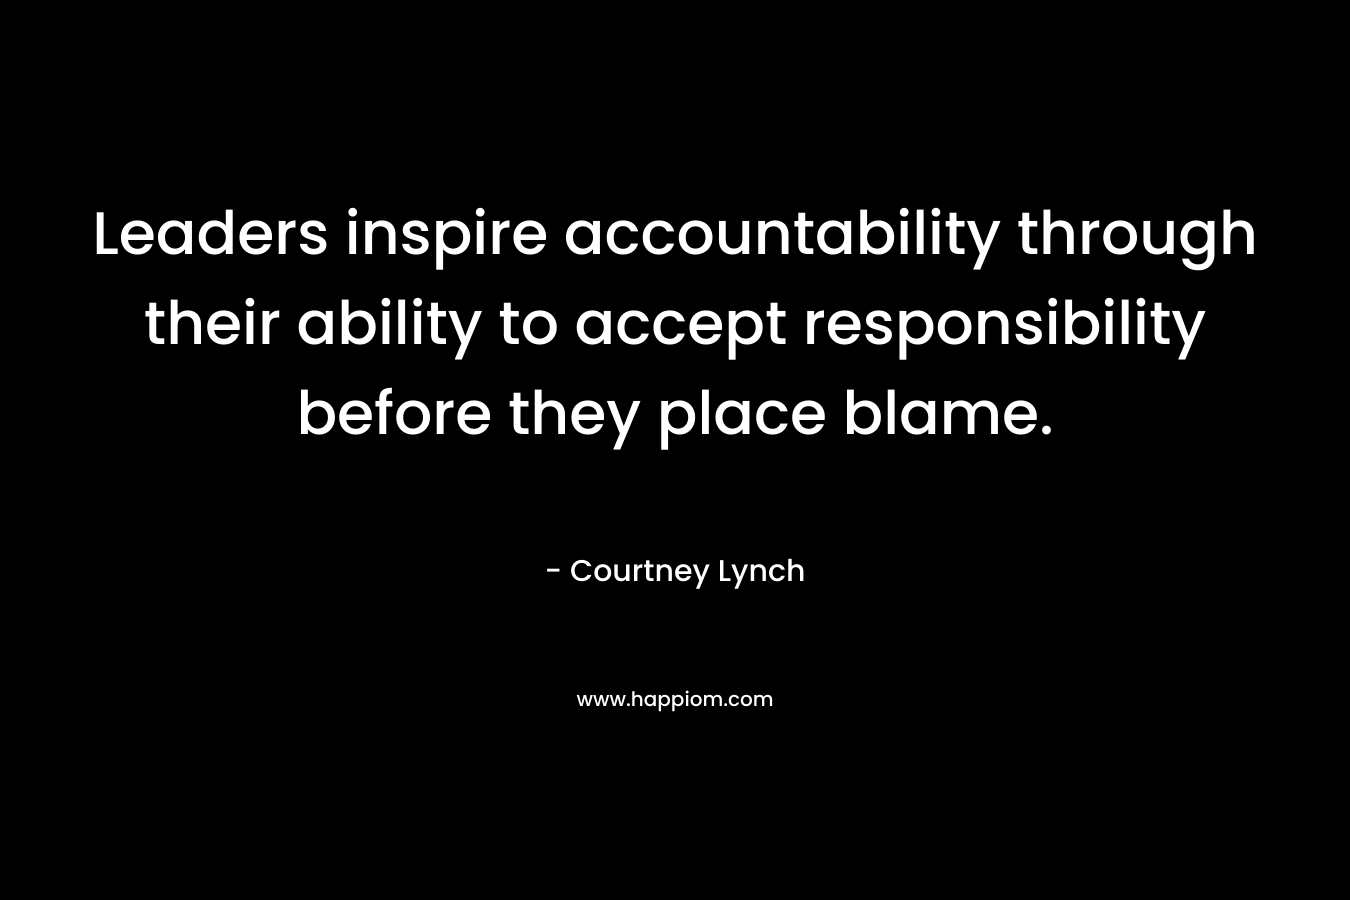 Leaders inspire accountability through their ability to accept responsibility before they place blame. – Courtney Lynch